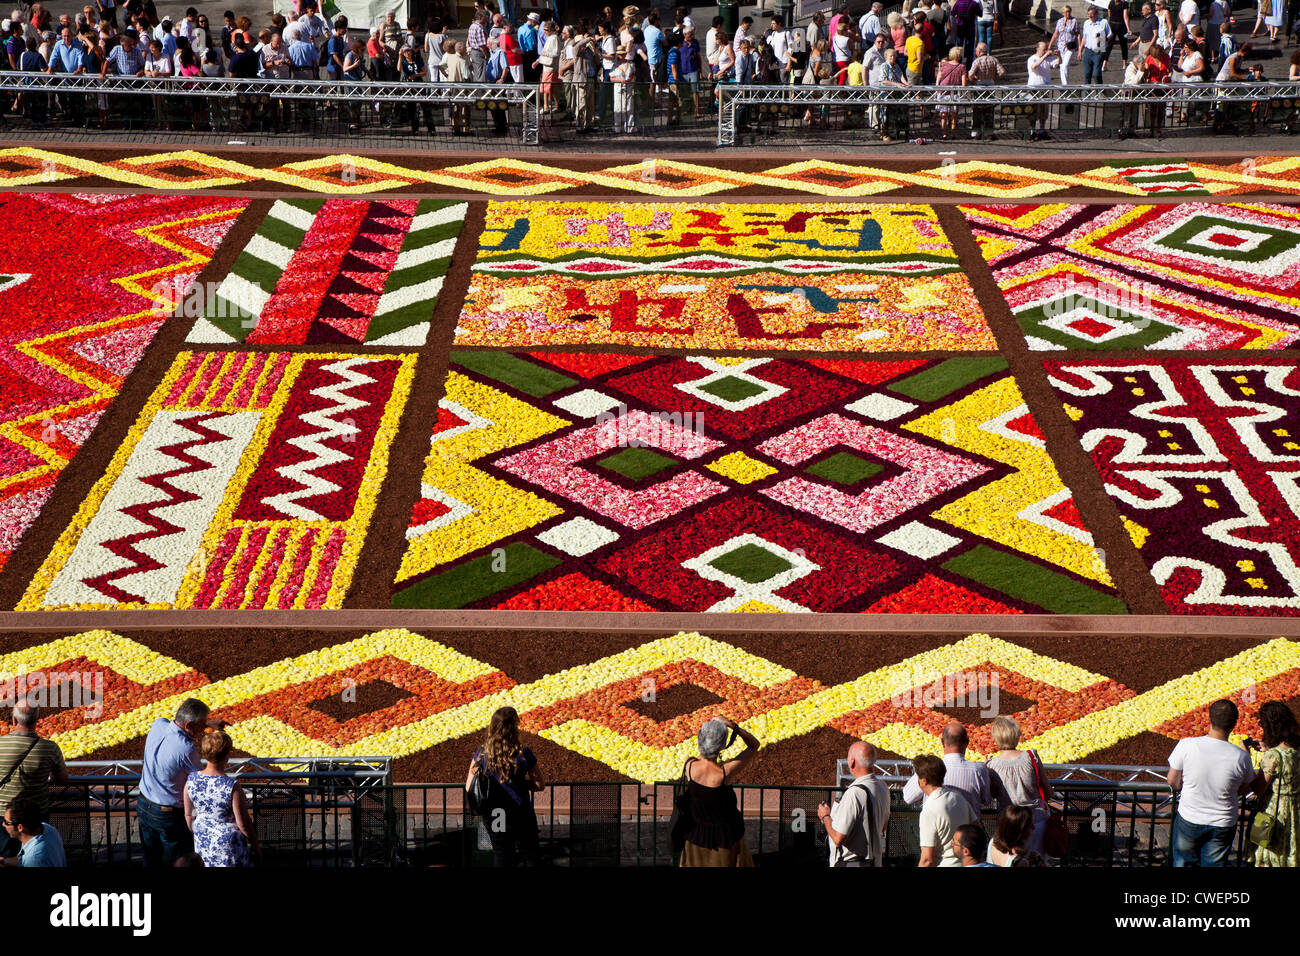 Detail of 2012 Flower Carpet, Tapis de Fleurs, in the Grand-Place, Brussels Stock Photo